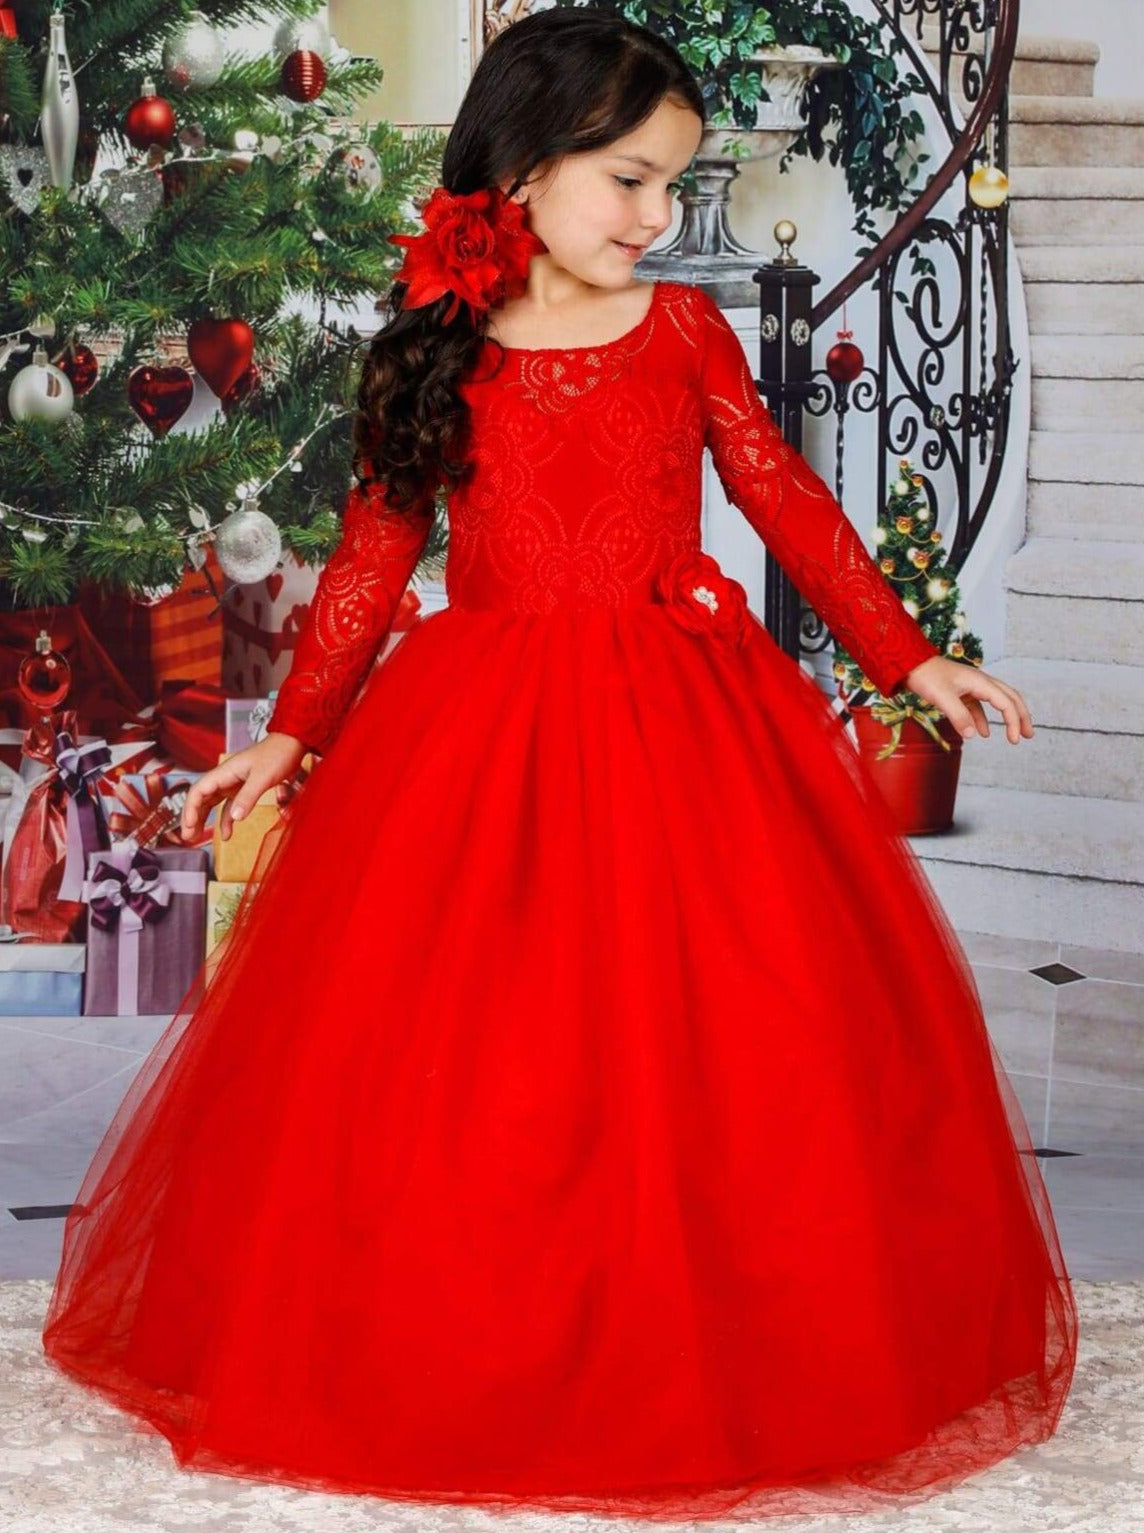 Girls Winter Formal Dress | Lace Bodice Holiday Gown | Mia Belle Girls